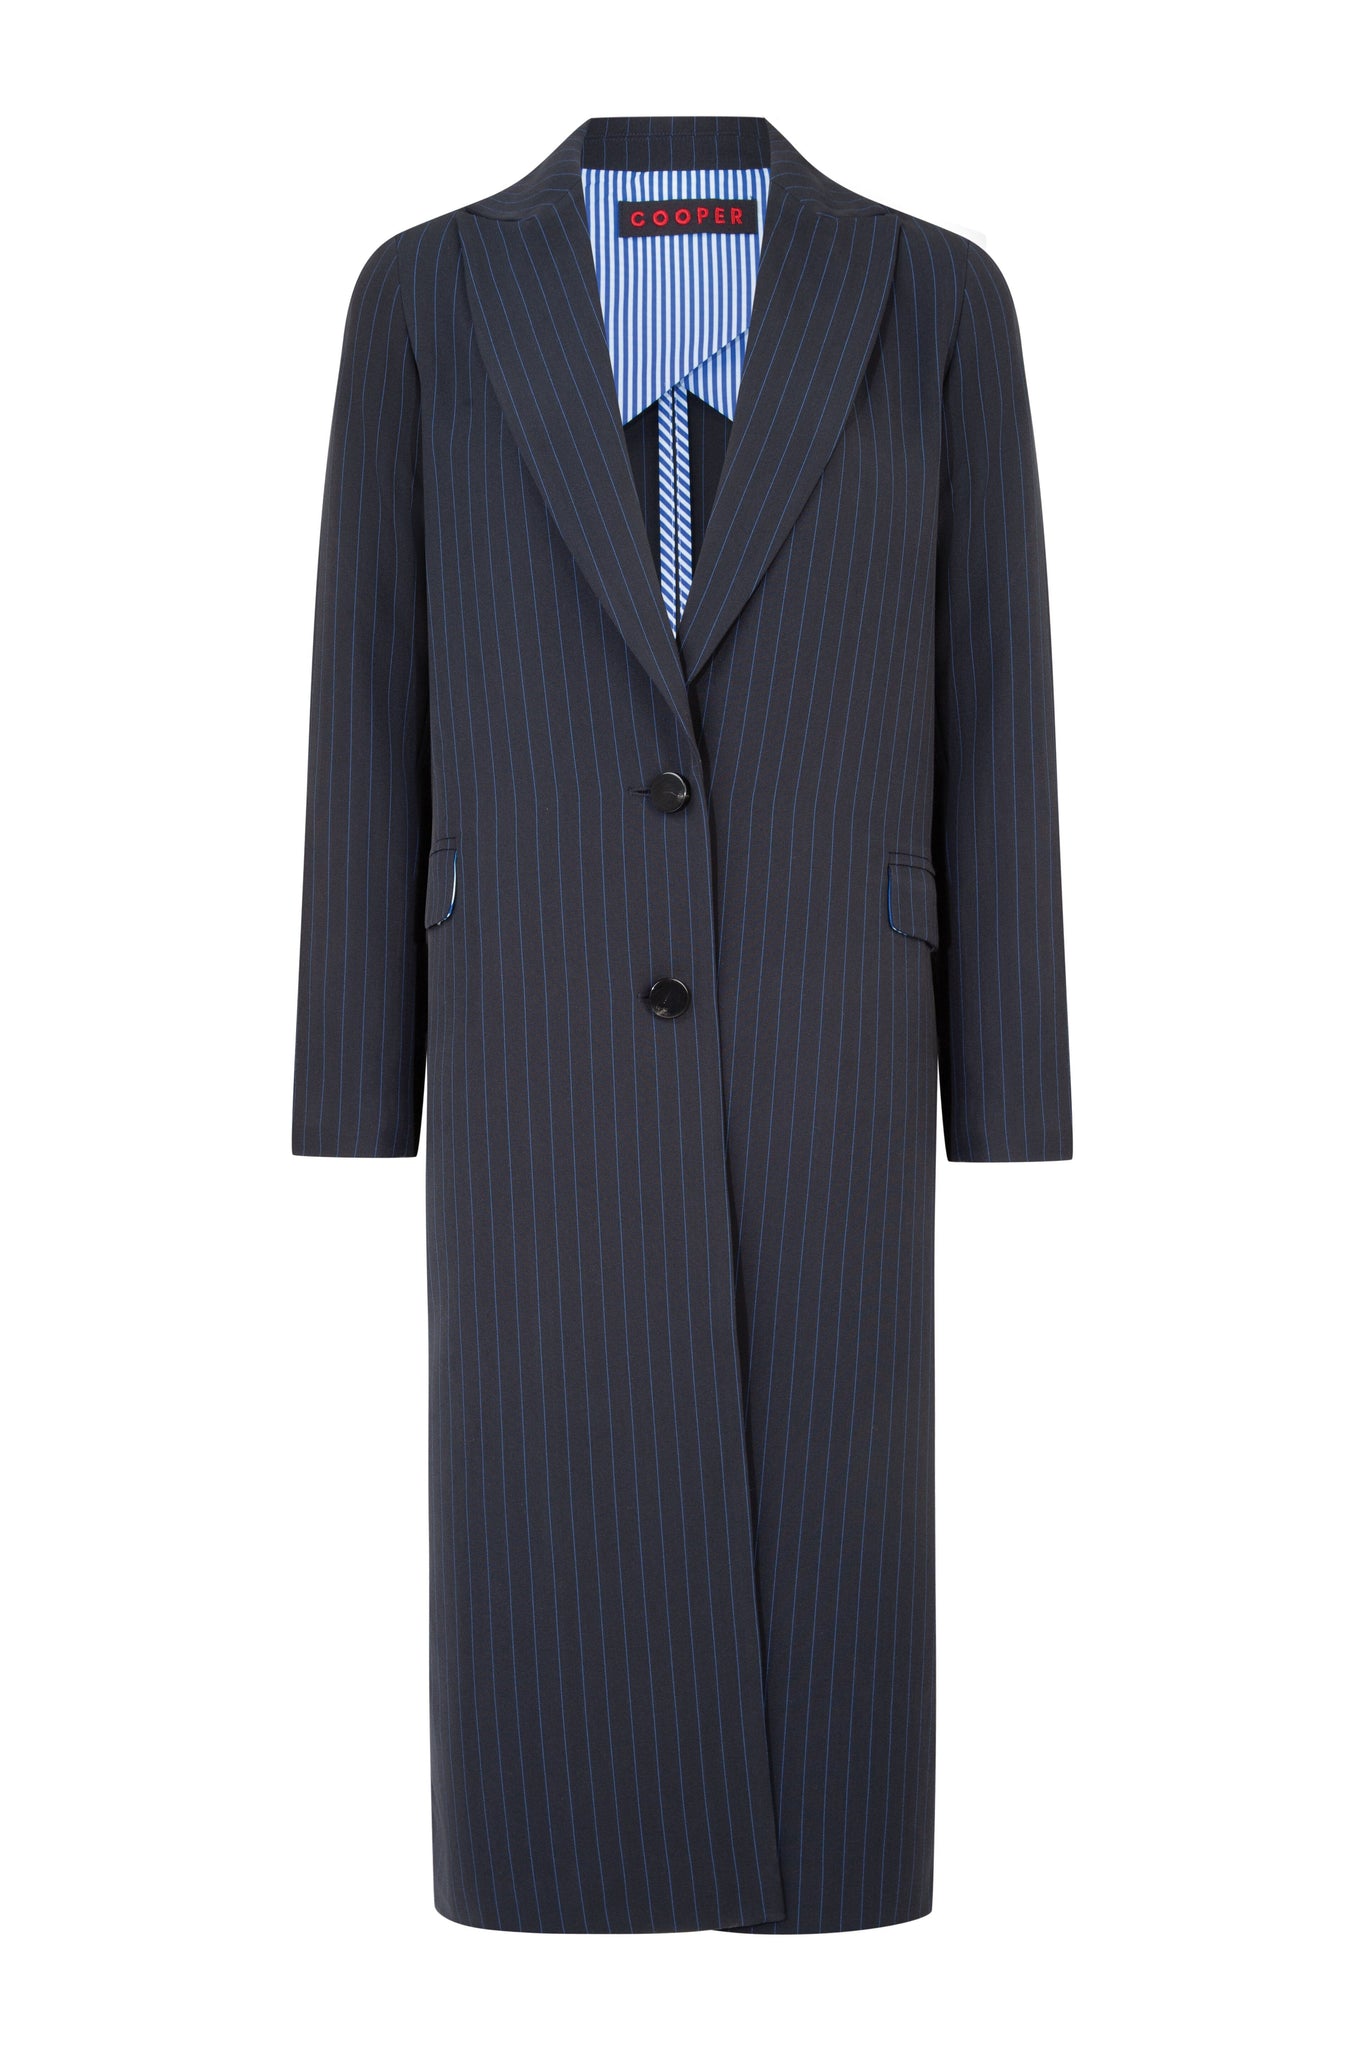 BACK TO THE FUTURE NAVY PINSTRIPE